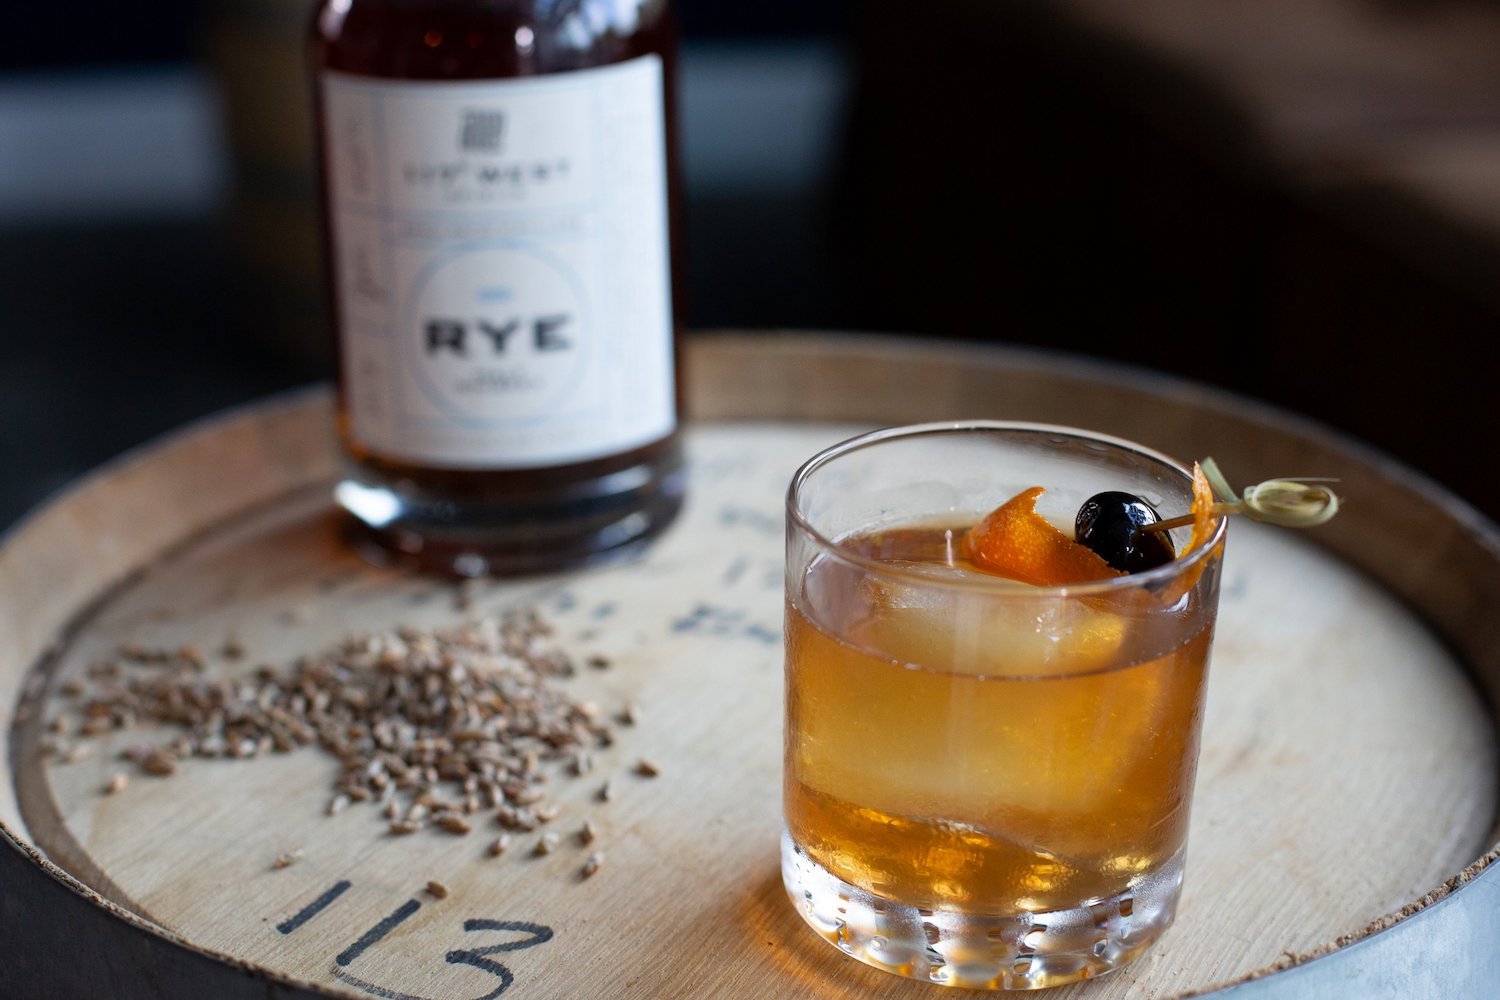 Rye cocktail from San Diego distillery 117° West Spirits opening a new location in Vista